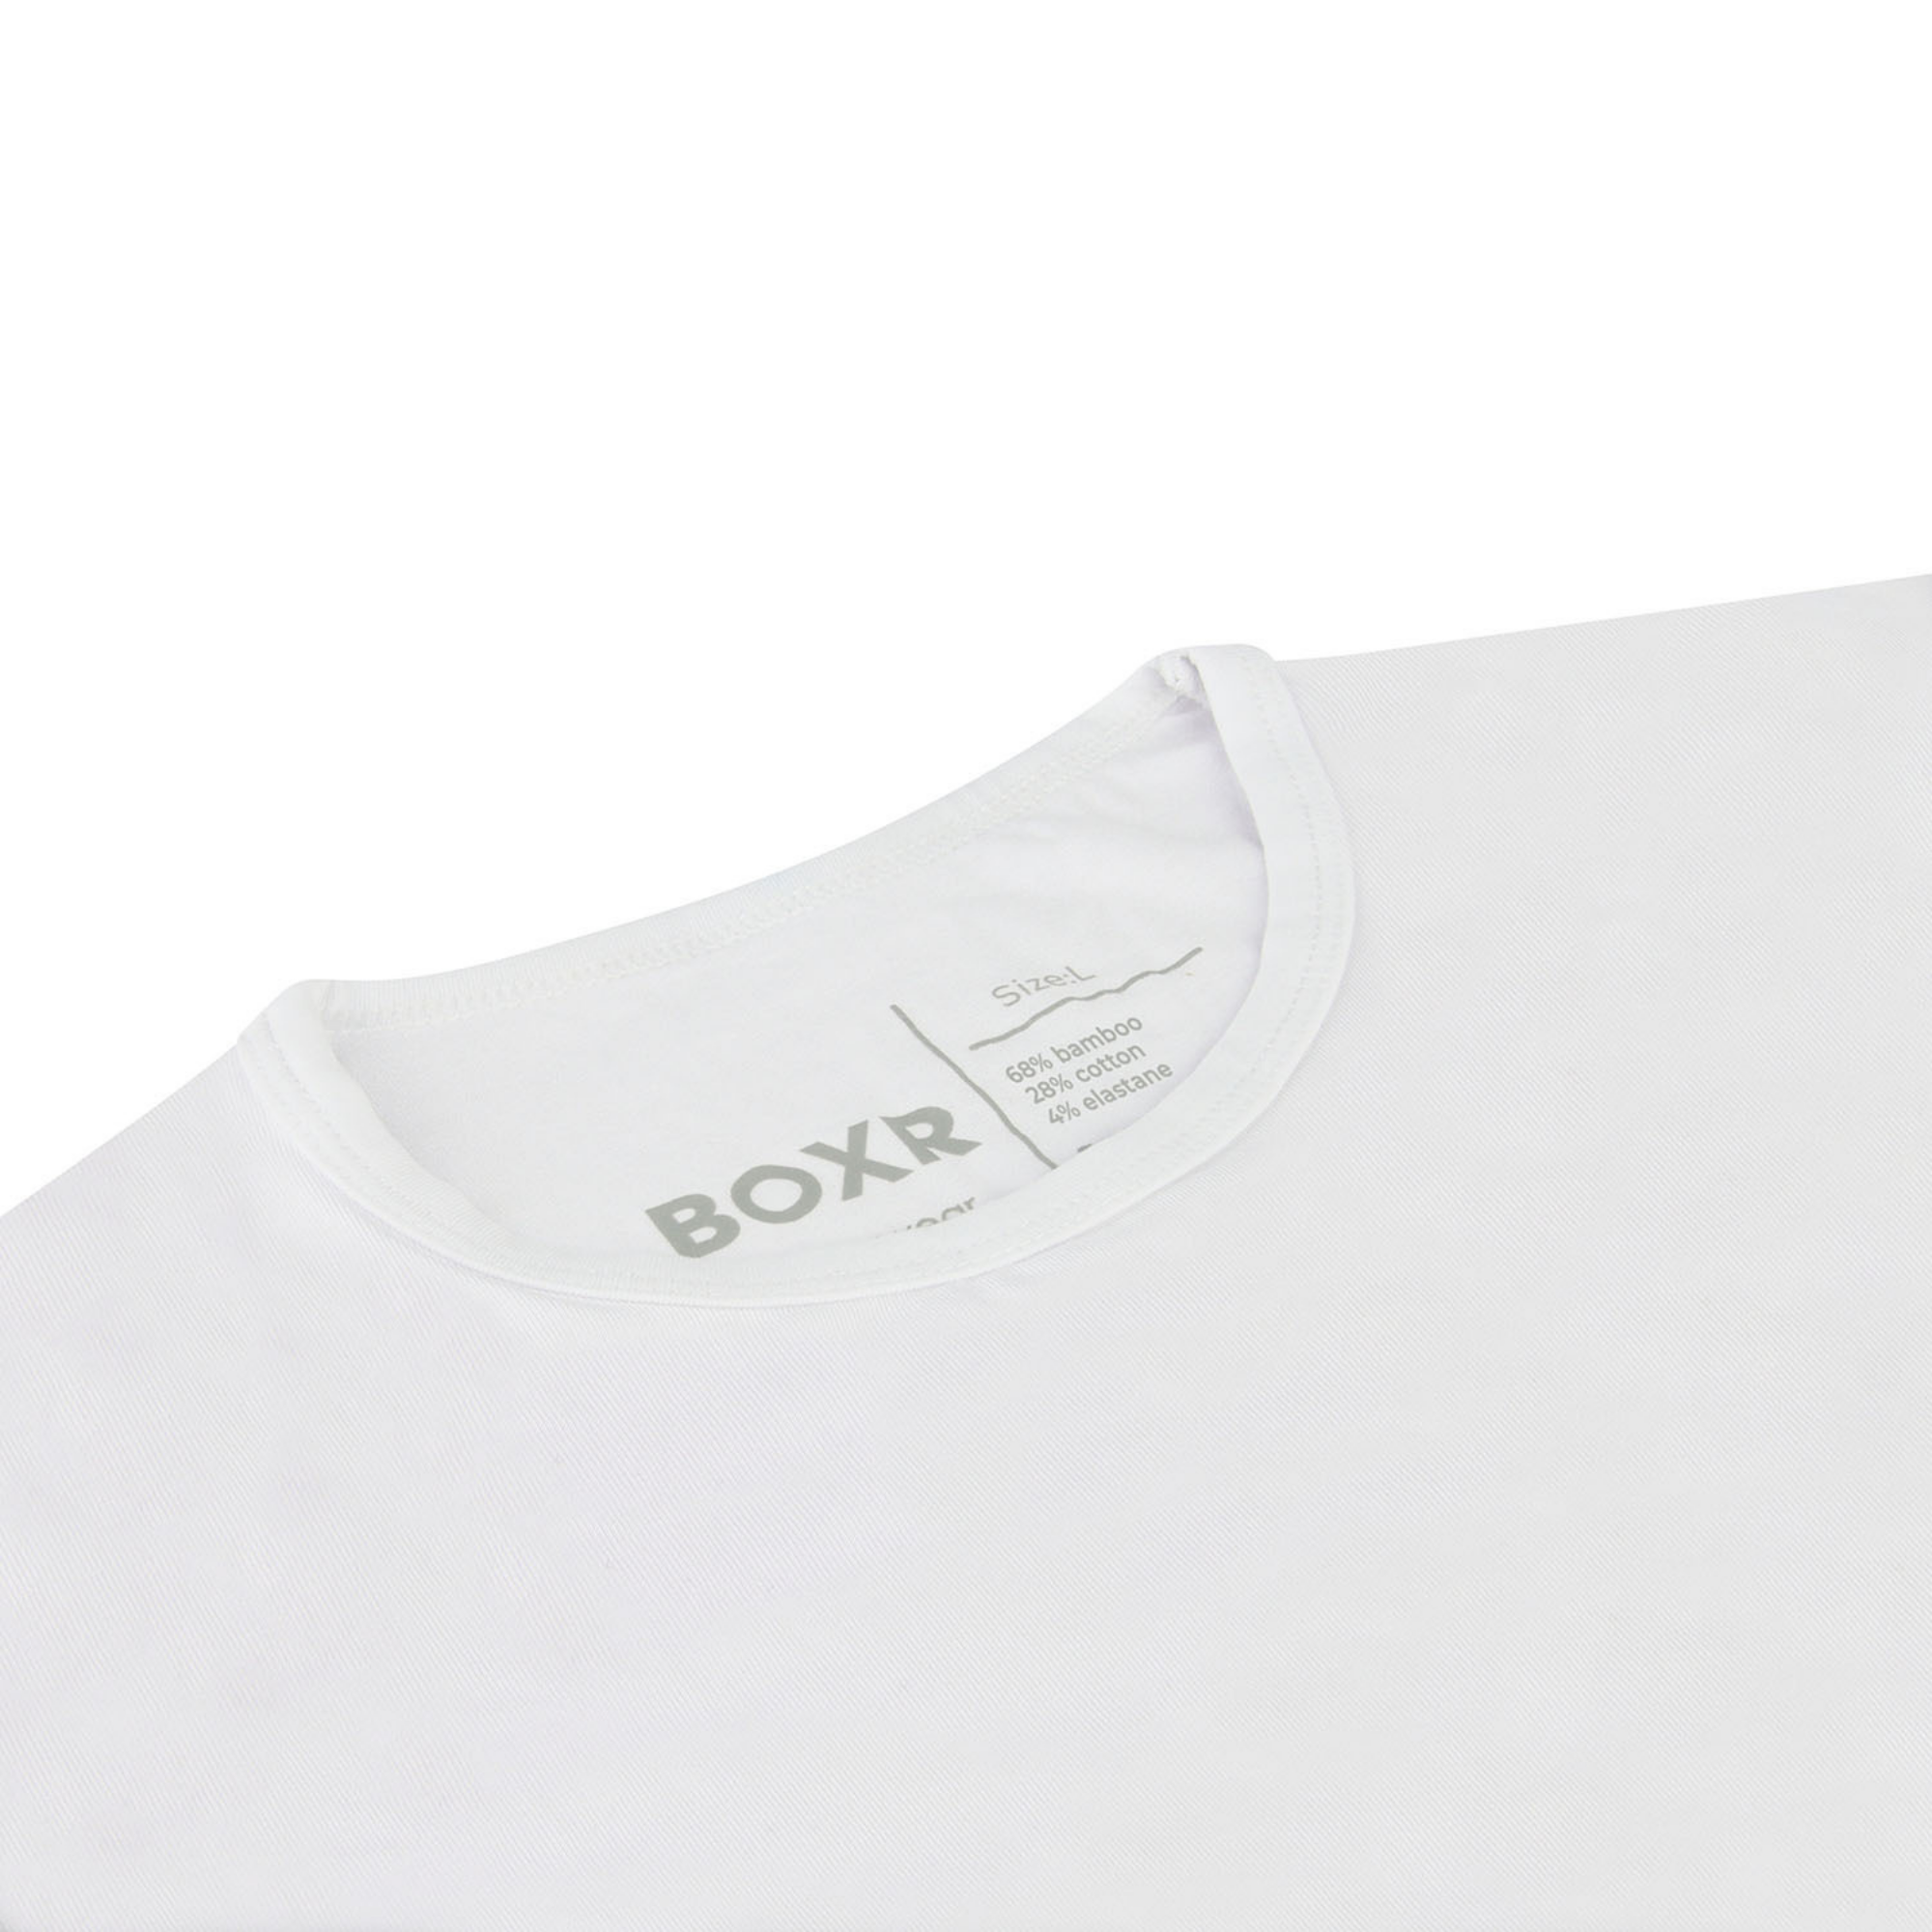 BOXR | Bamboe T-Shirt 4-Pack Wit